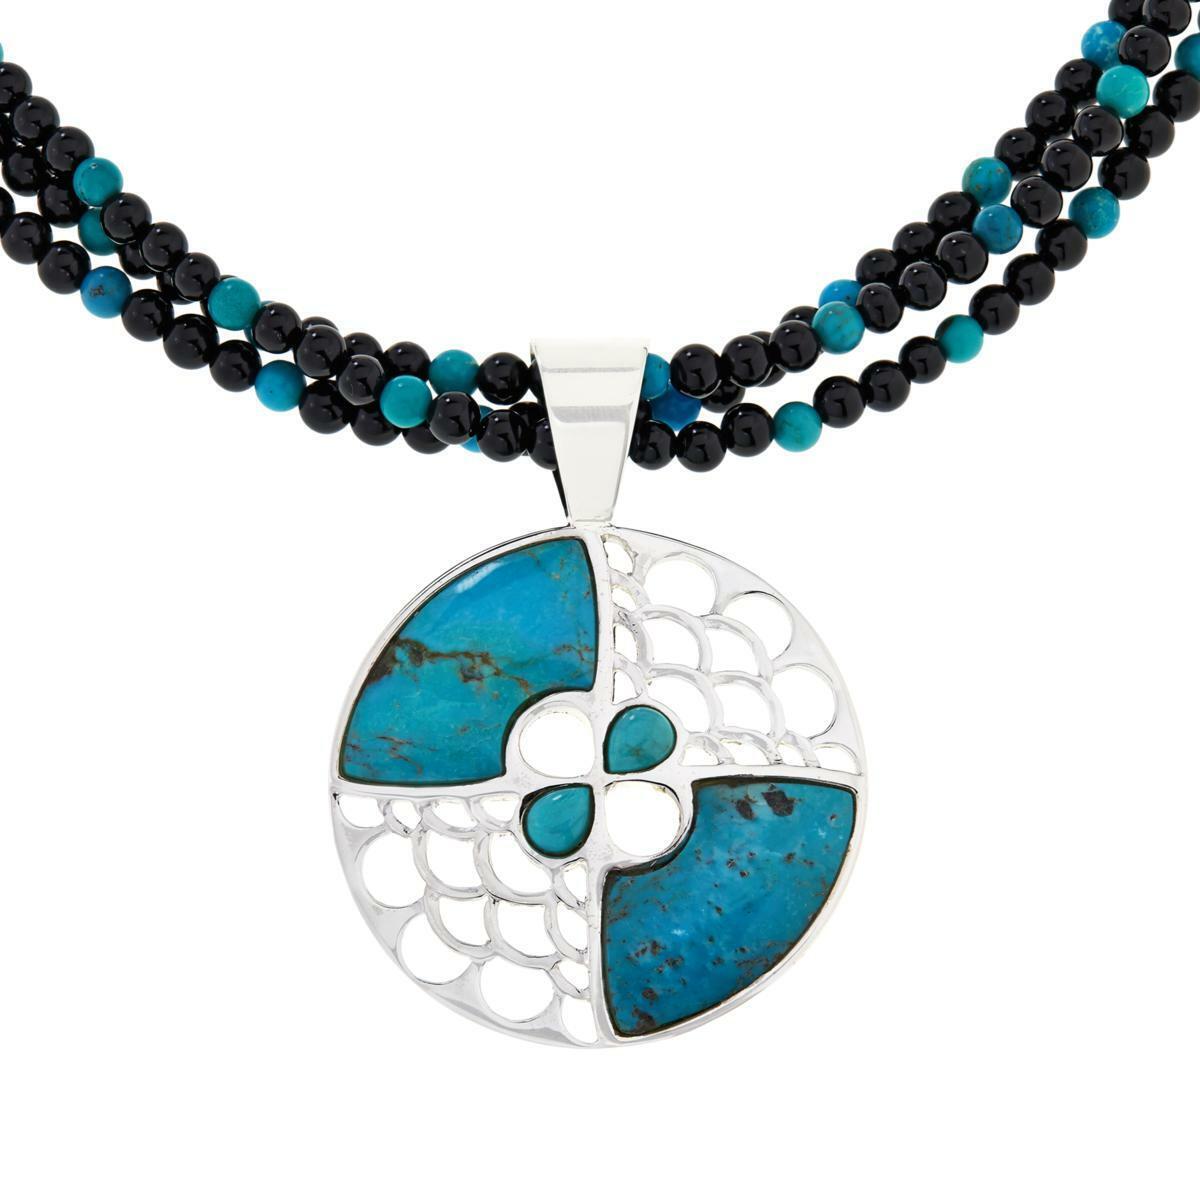 Jay King Gallery Collection Andean Blue Turquoise Pendant & Necklace 20"